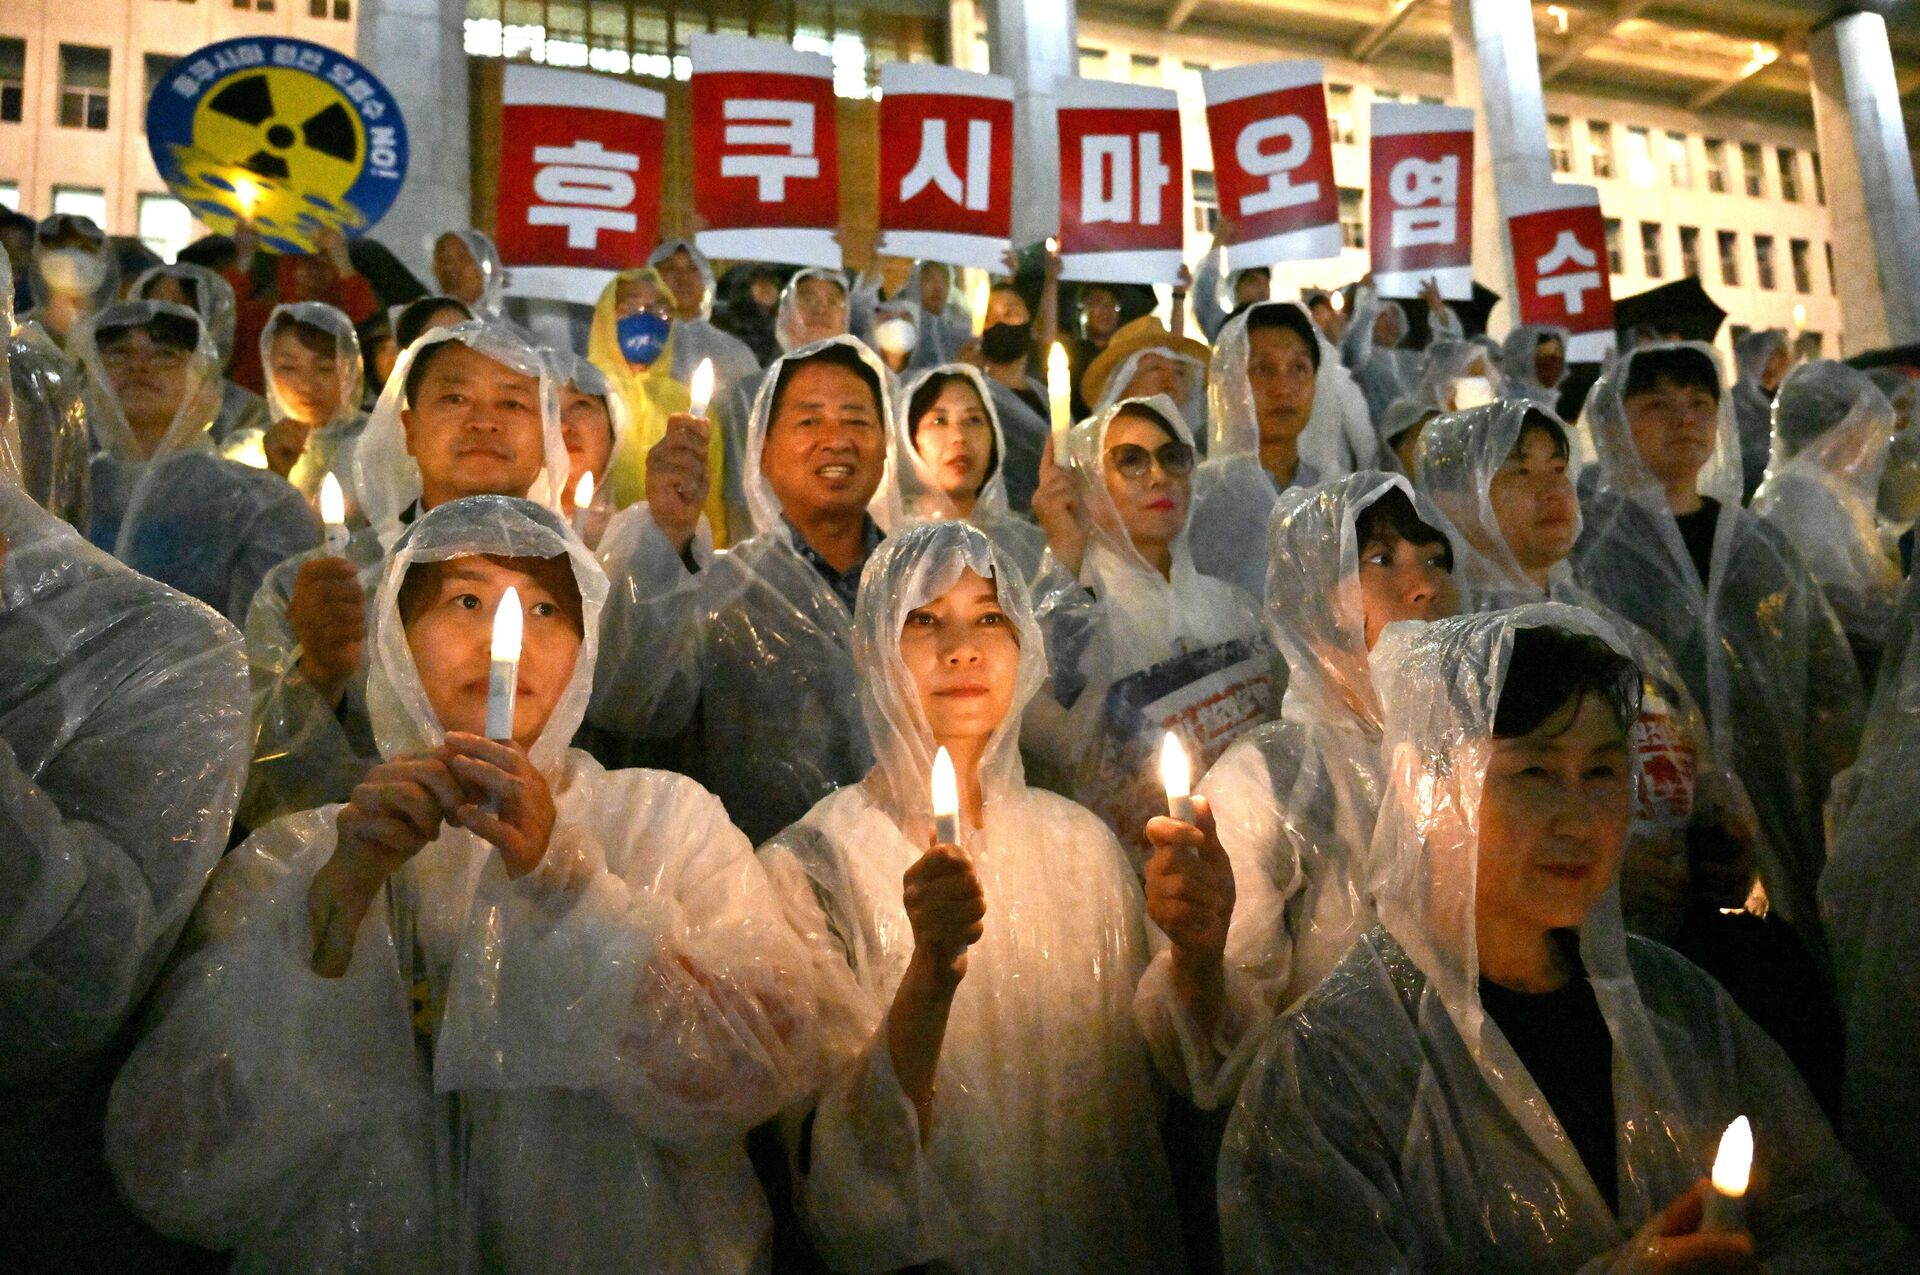 South Korea's main opposition Democratic Party members hold electric candles and signs reading Fukushima contaminated water during a rally against Japan's plan to release treated water from the Fukushima nuclear plant, at the National Assembly in Seoul on August 23, 2023 - Sputnik International, 1920, 23.08.2023